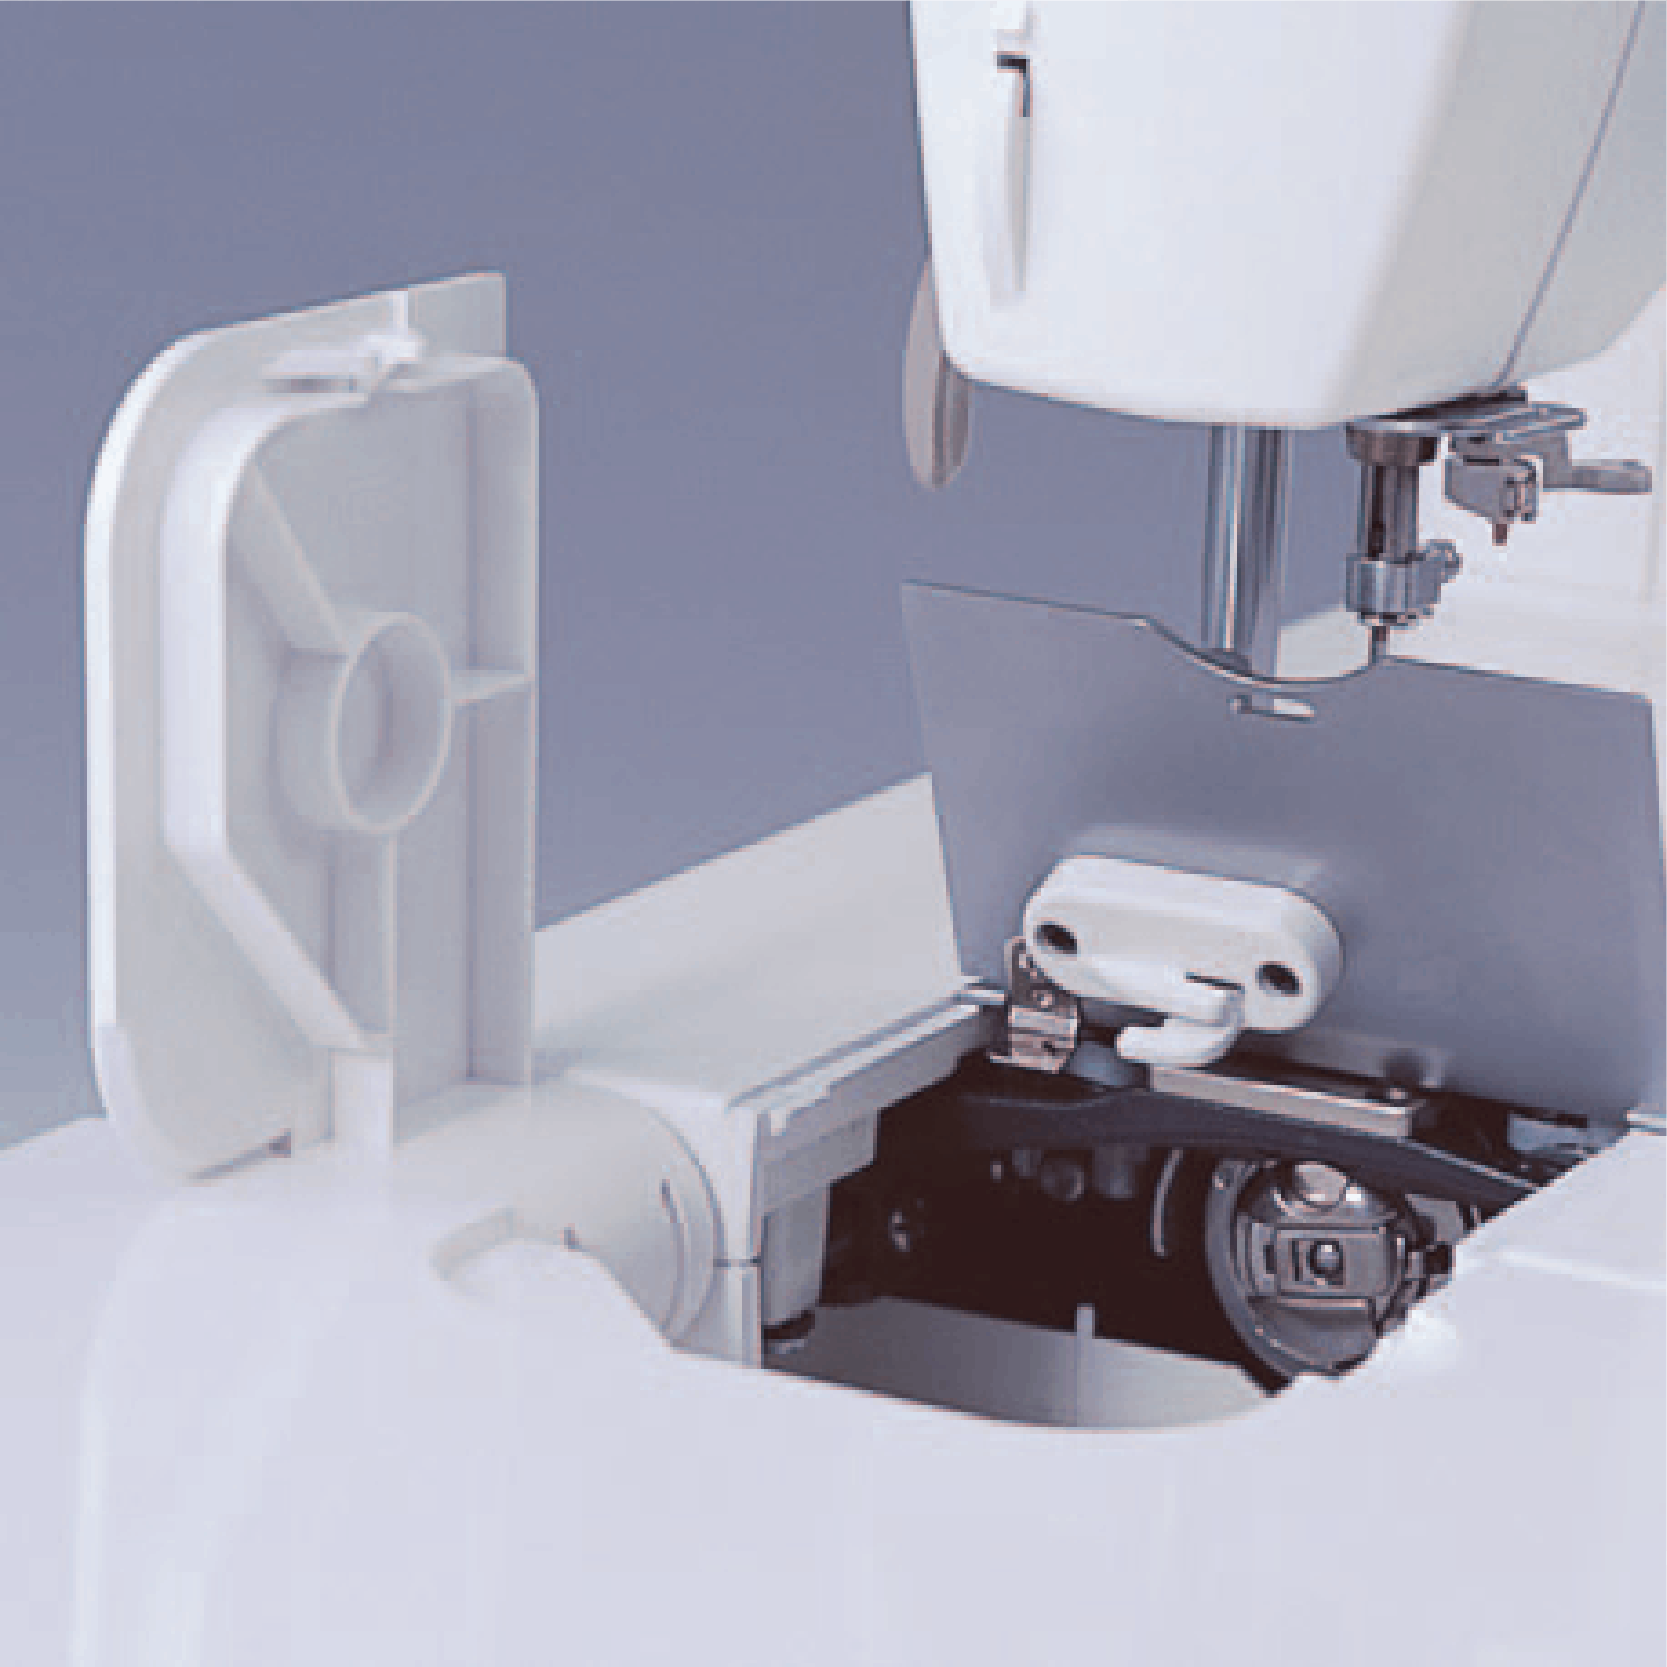  Brother PQ1500SL Sewing & Quilting Machine